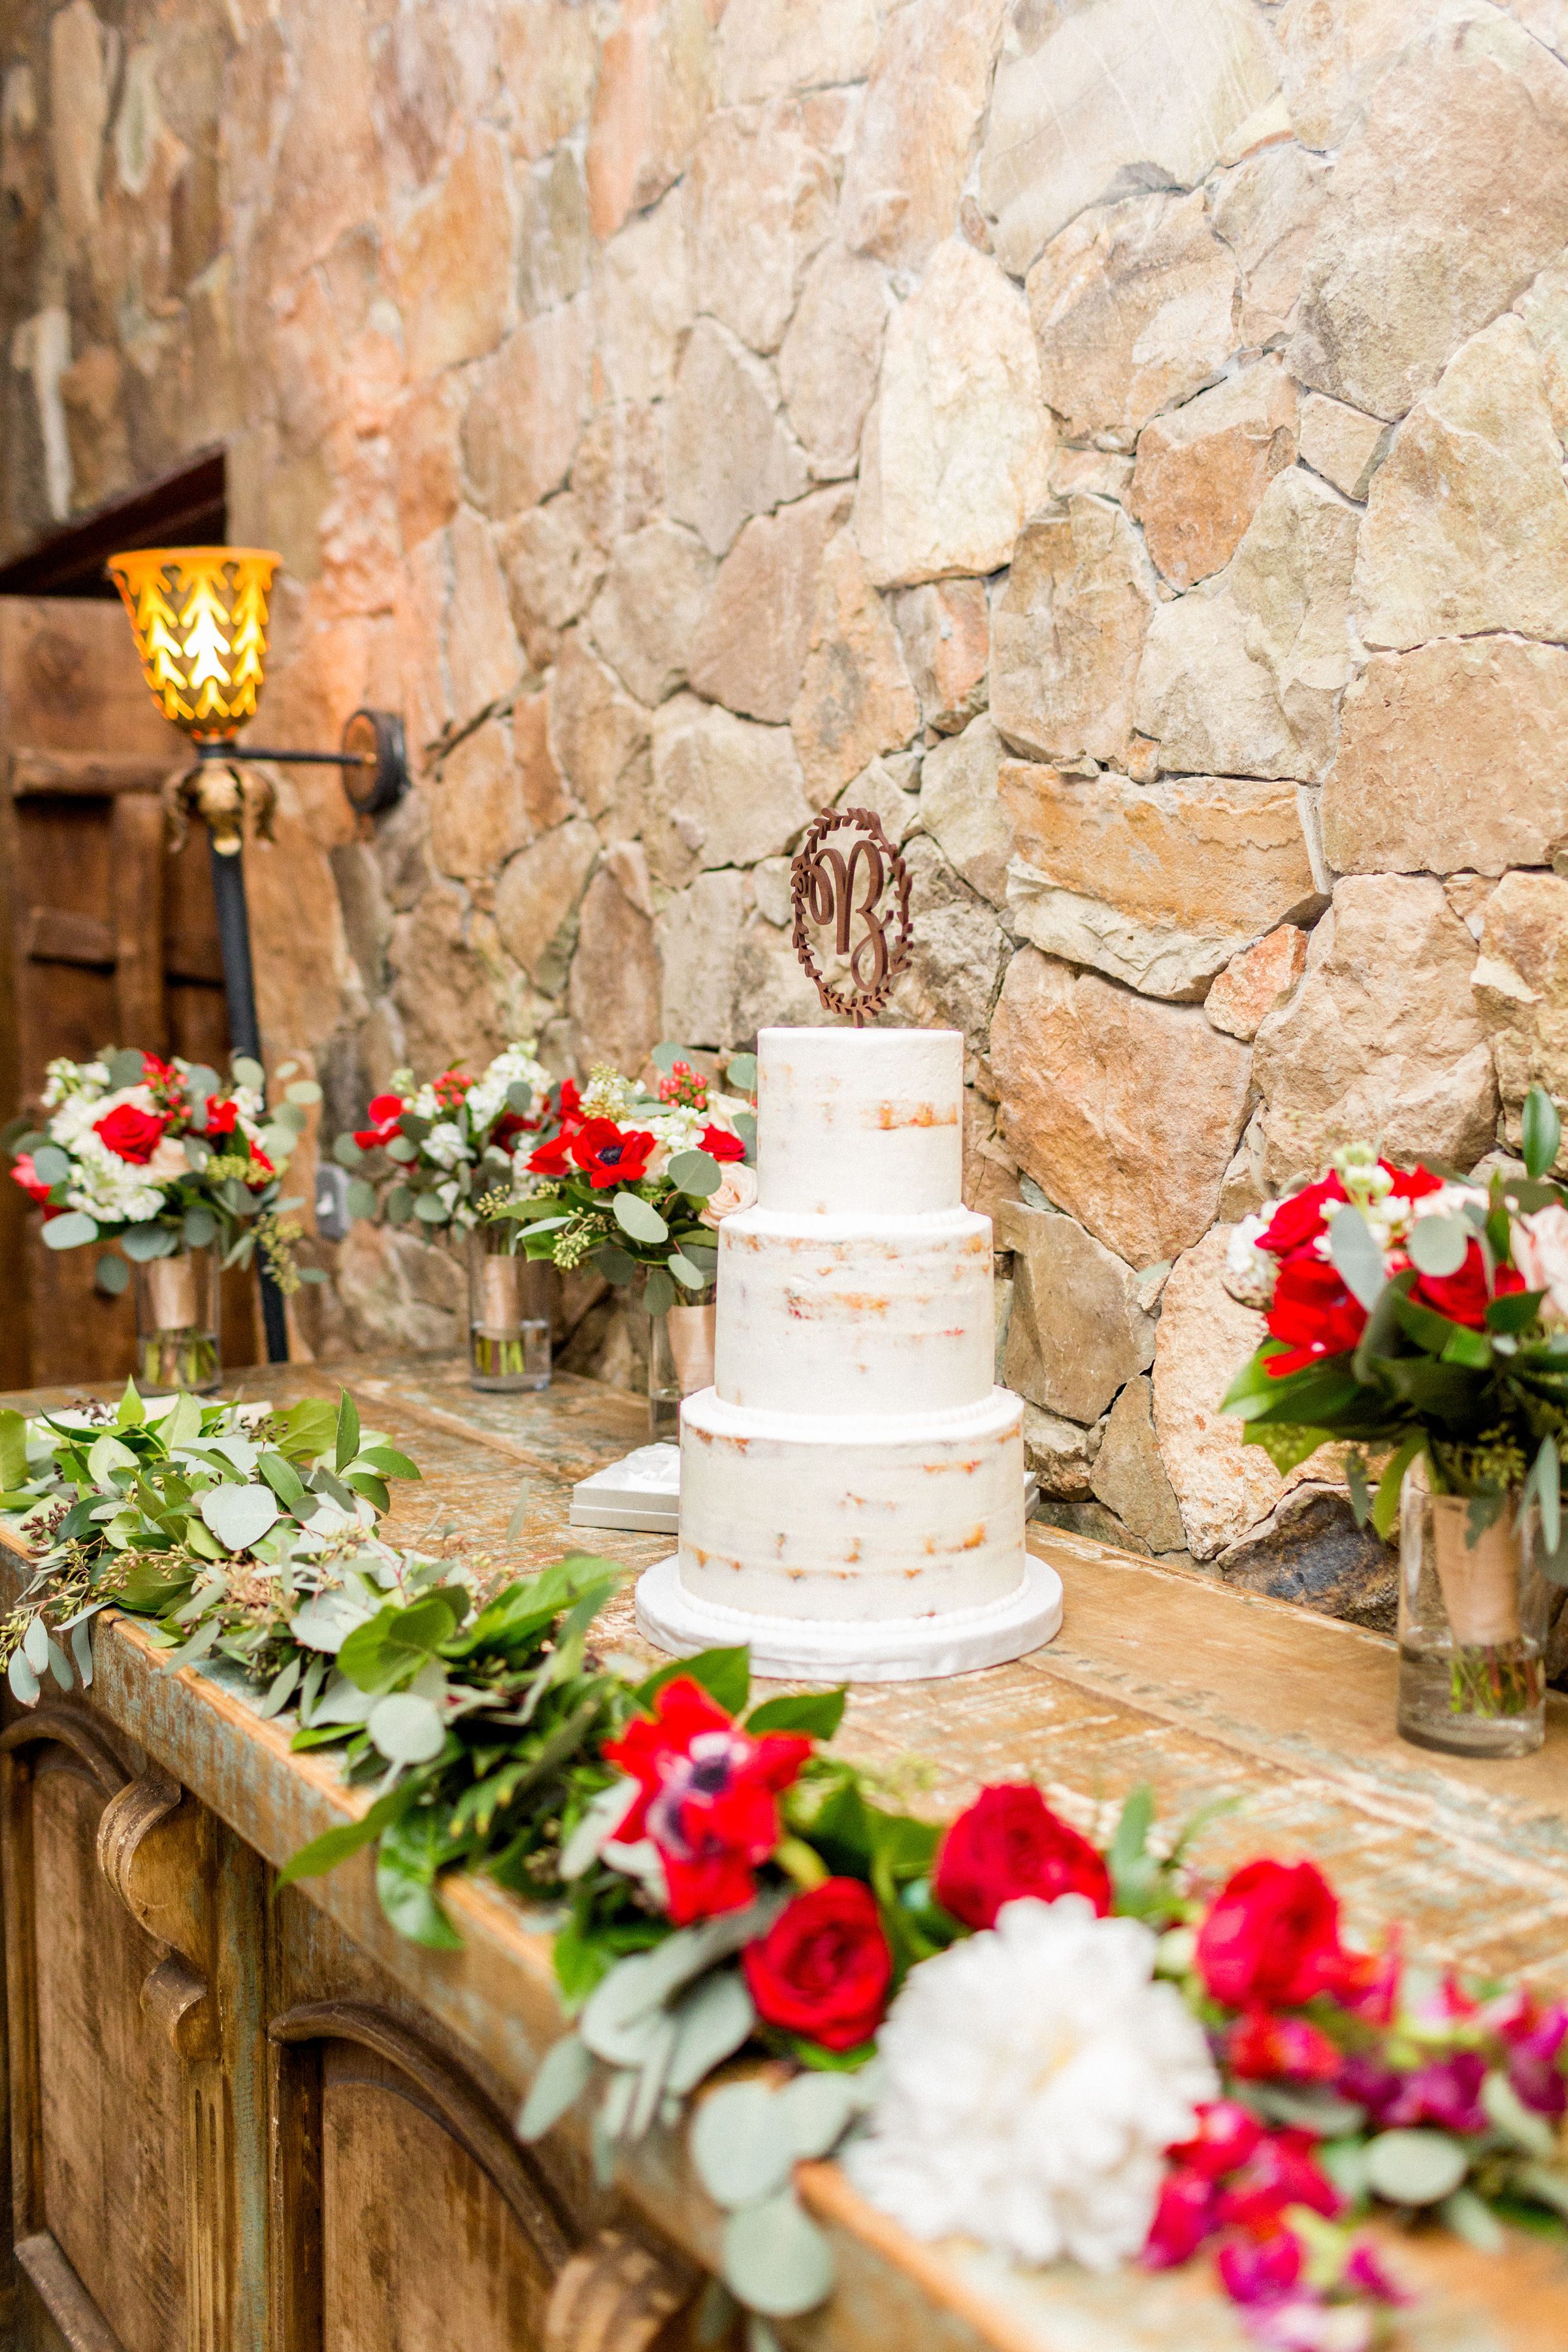 Greenery blends to flowers in this mantle spray at Stone Tower Winery. The cake was surrounded by bridal bouquets in cylinders. Photography by Candice Adele.